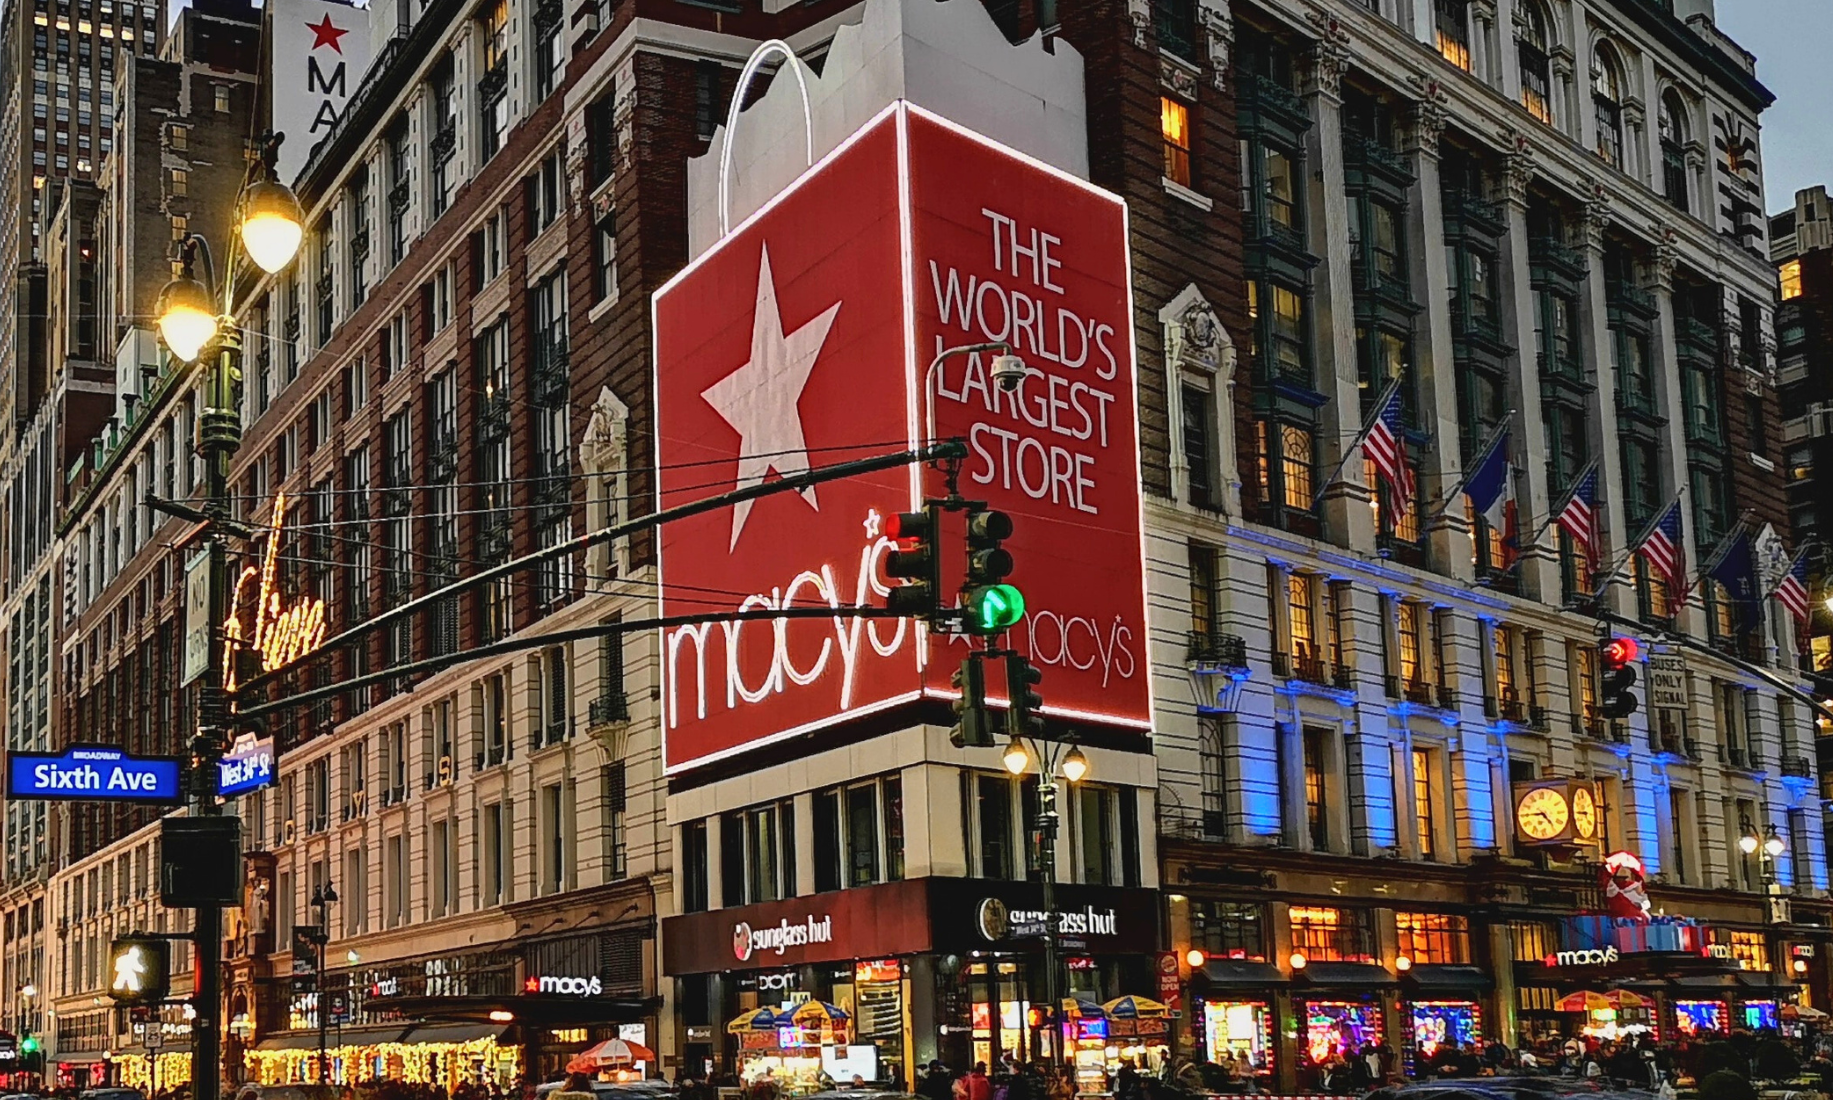 Large Macy's store